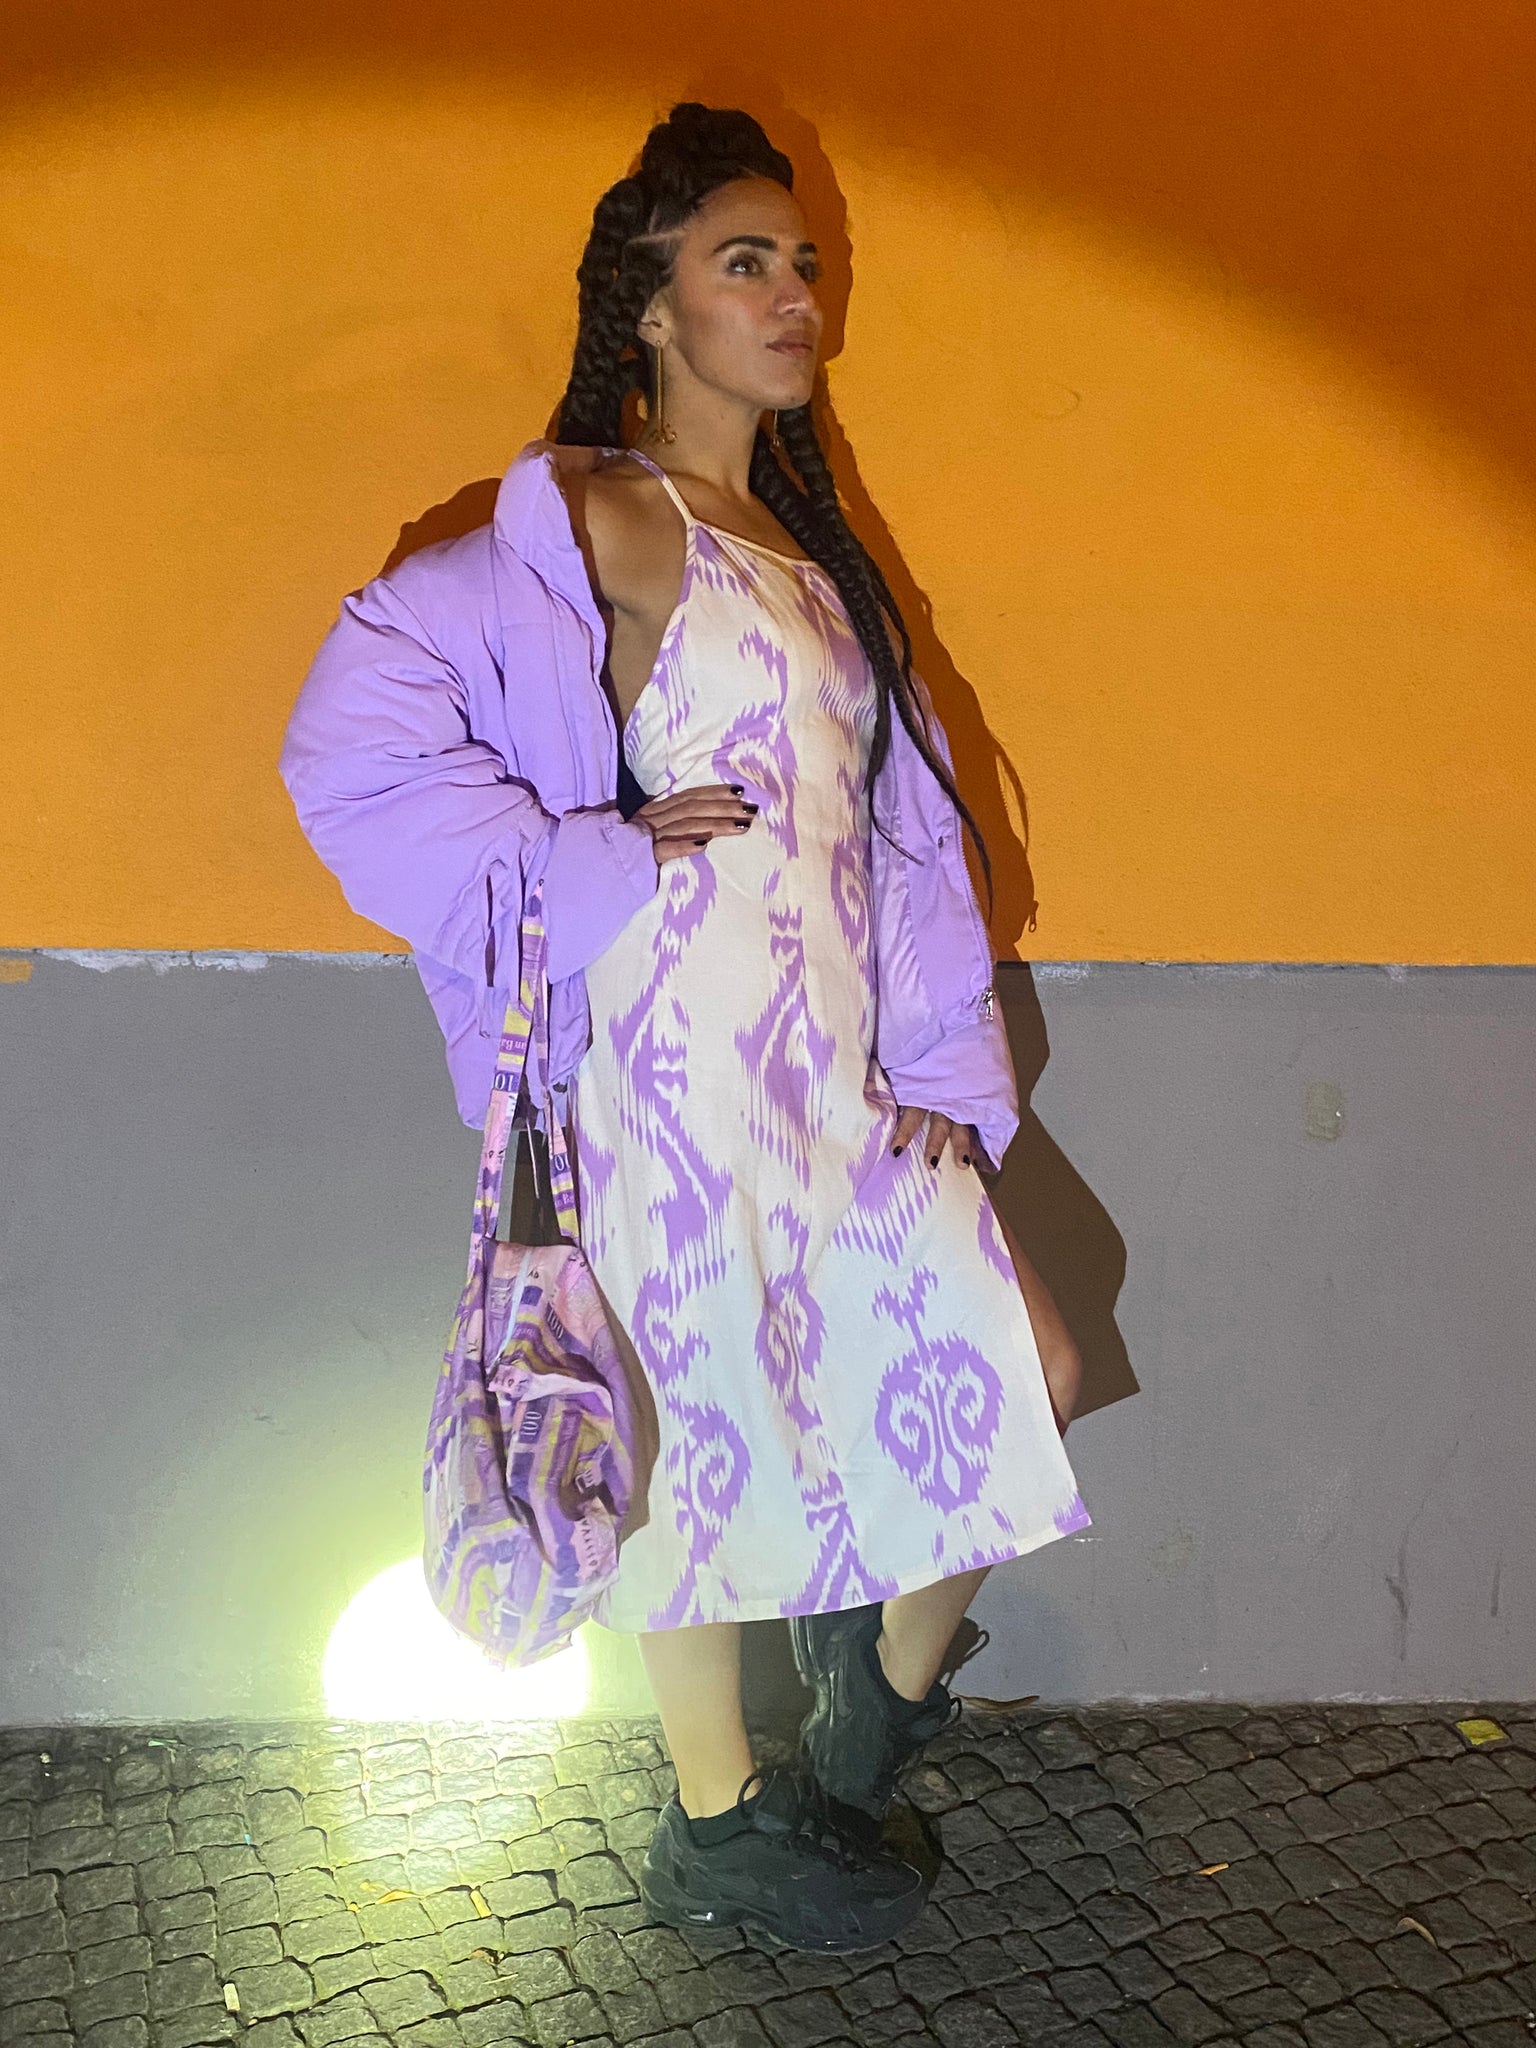 A woman strikes a pose on a night street showing the curve of her back in a white and lavender adras dress against an orange and grey wall.